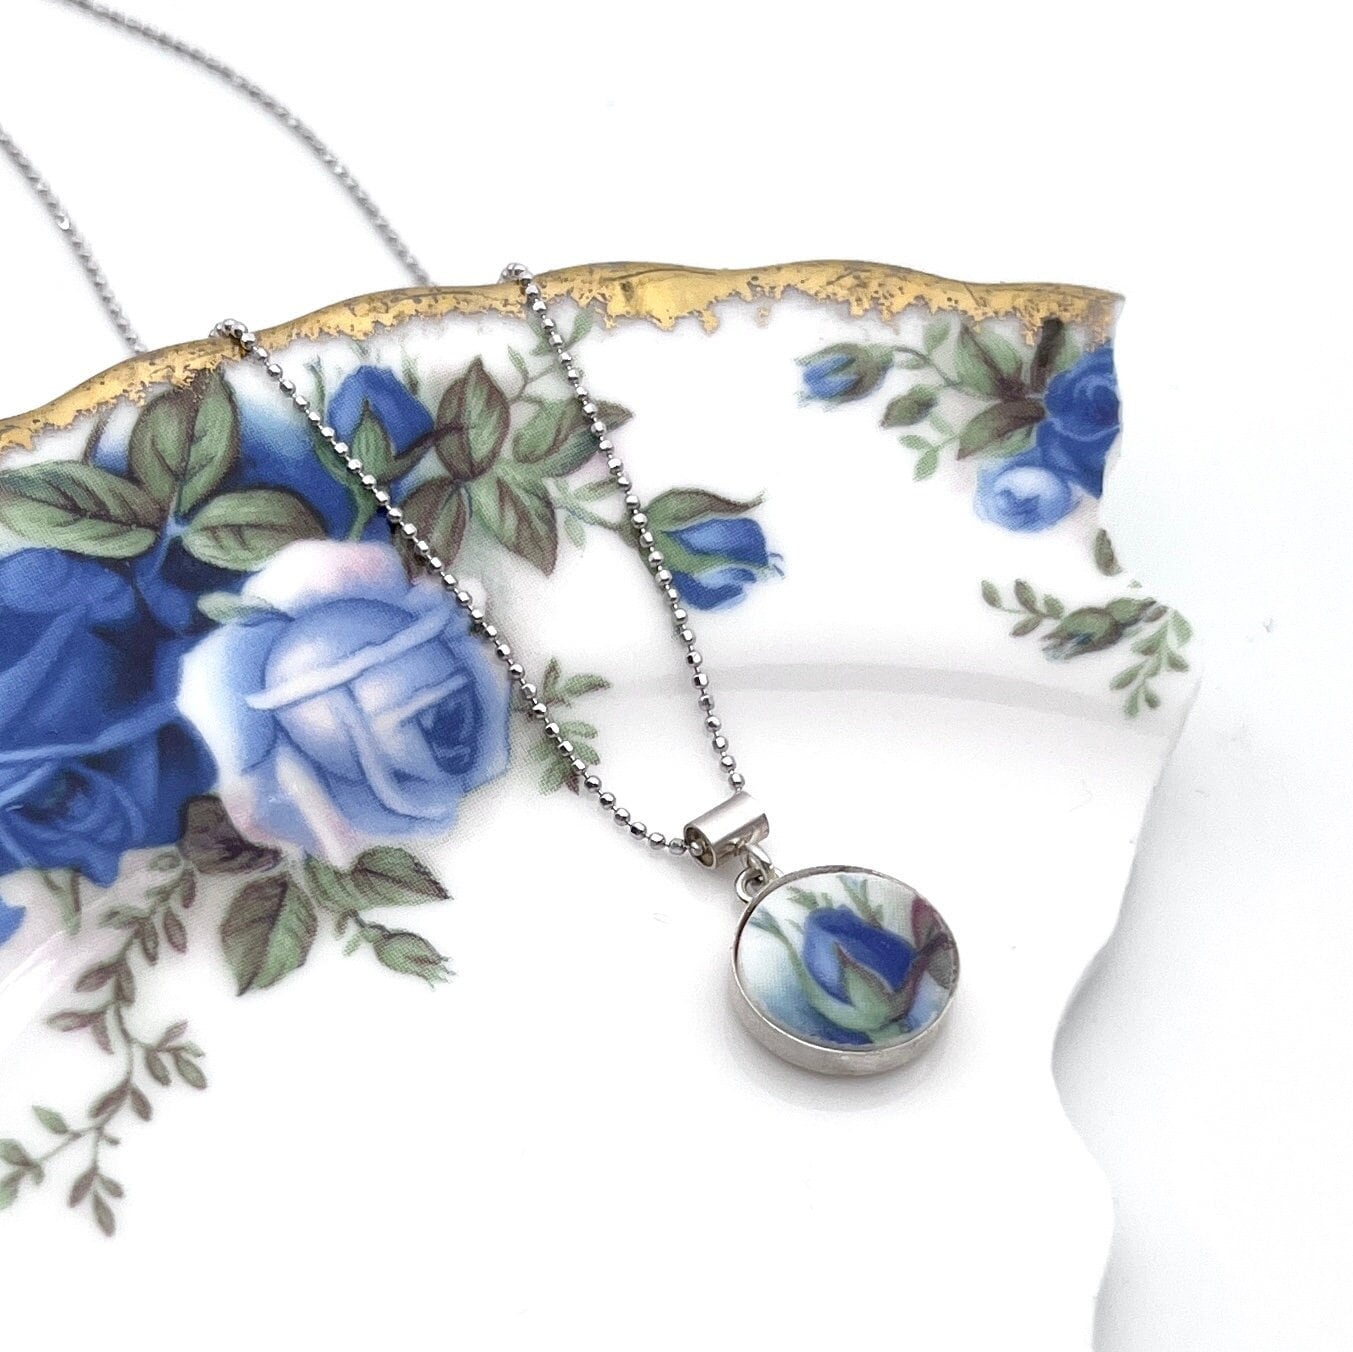 Moonlight Rose Dainty Necklace, Royal Albert Broken China Jewelry, Blue Rose China Necklace, Unique Birthday Handmade Jewelry Gift for Women